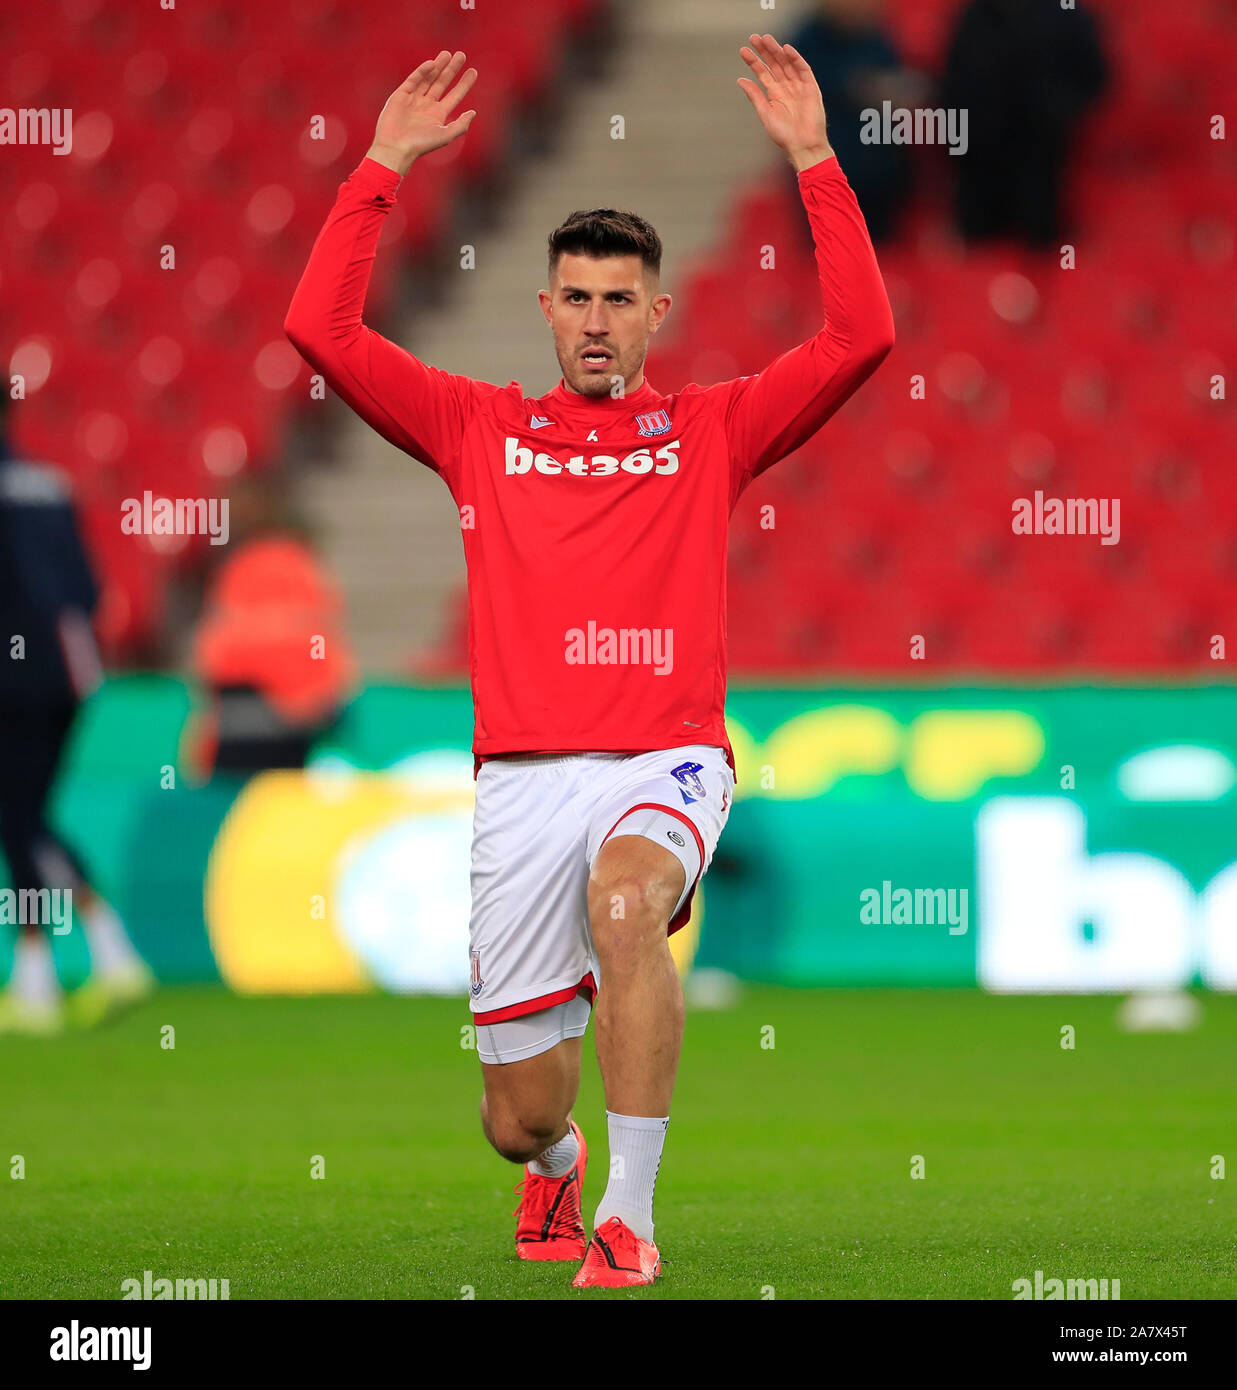 4th November 2019, Bet365 Stadium, Stoke-on-Trent, England; Sky Bet Championship, Stoke City v West Bromwich Albion : Danny Baath (6) of Stoke City warms up for the match Credit: Conor Molloy/News Images Stock Photo